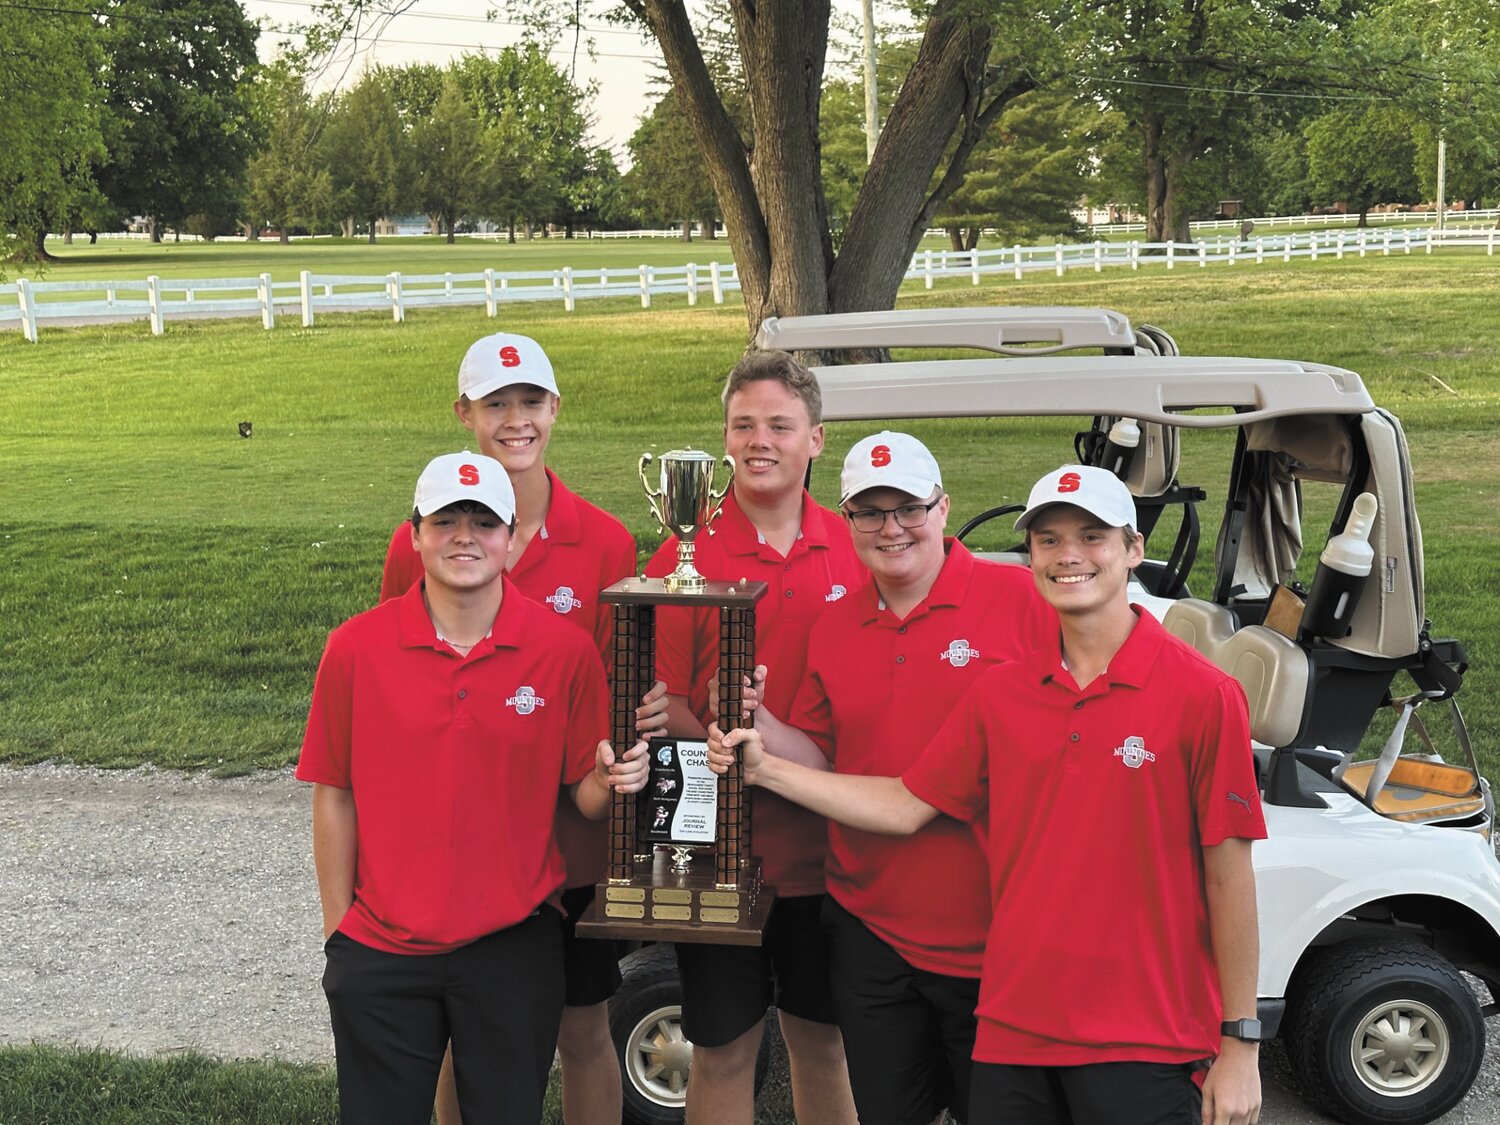 Southmont boys golf fired a 337 on their home course during Thursday’s Montgomery County Golf meet to win the county title. The win for the Mounties also gave Southmont their fourth County Chase Championship in the last five years. The team poised for a picture with the Chase Trophy.